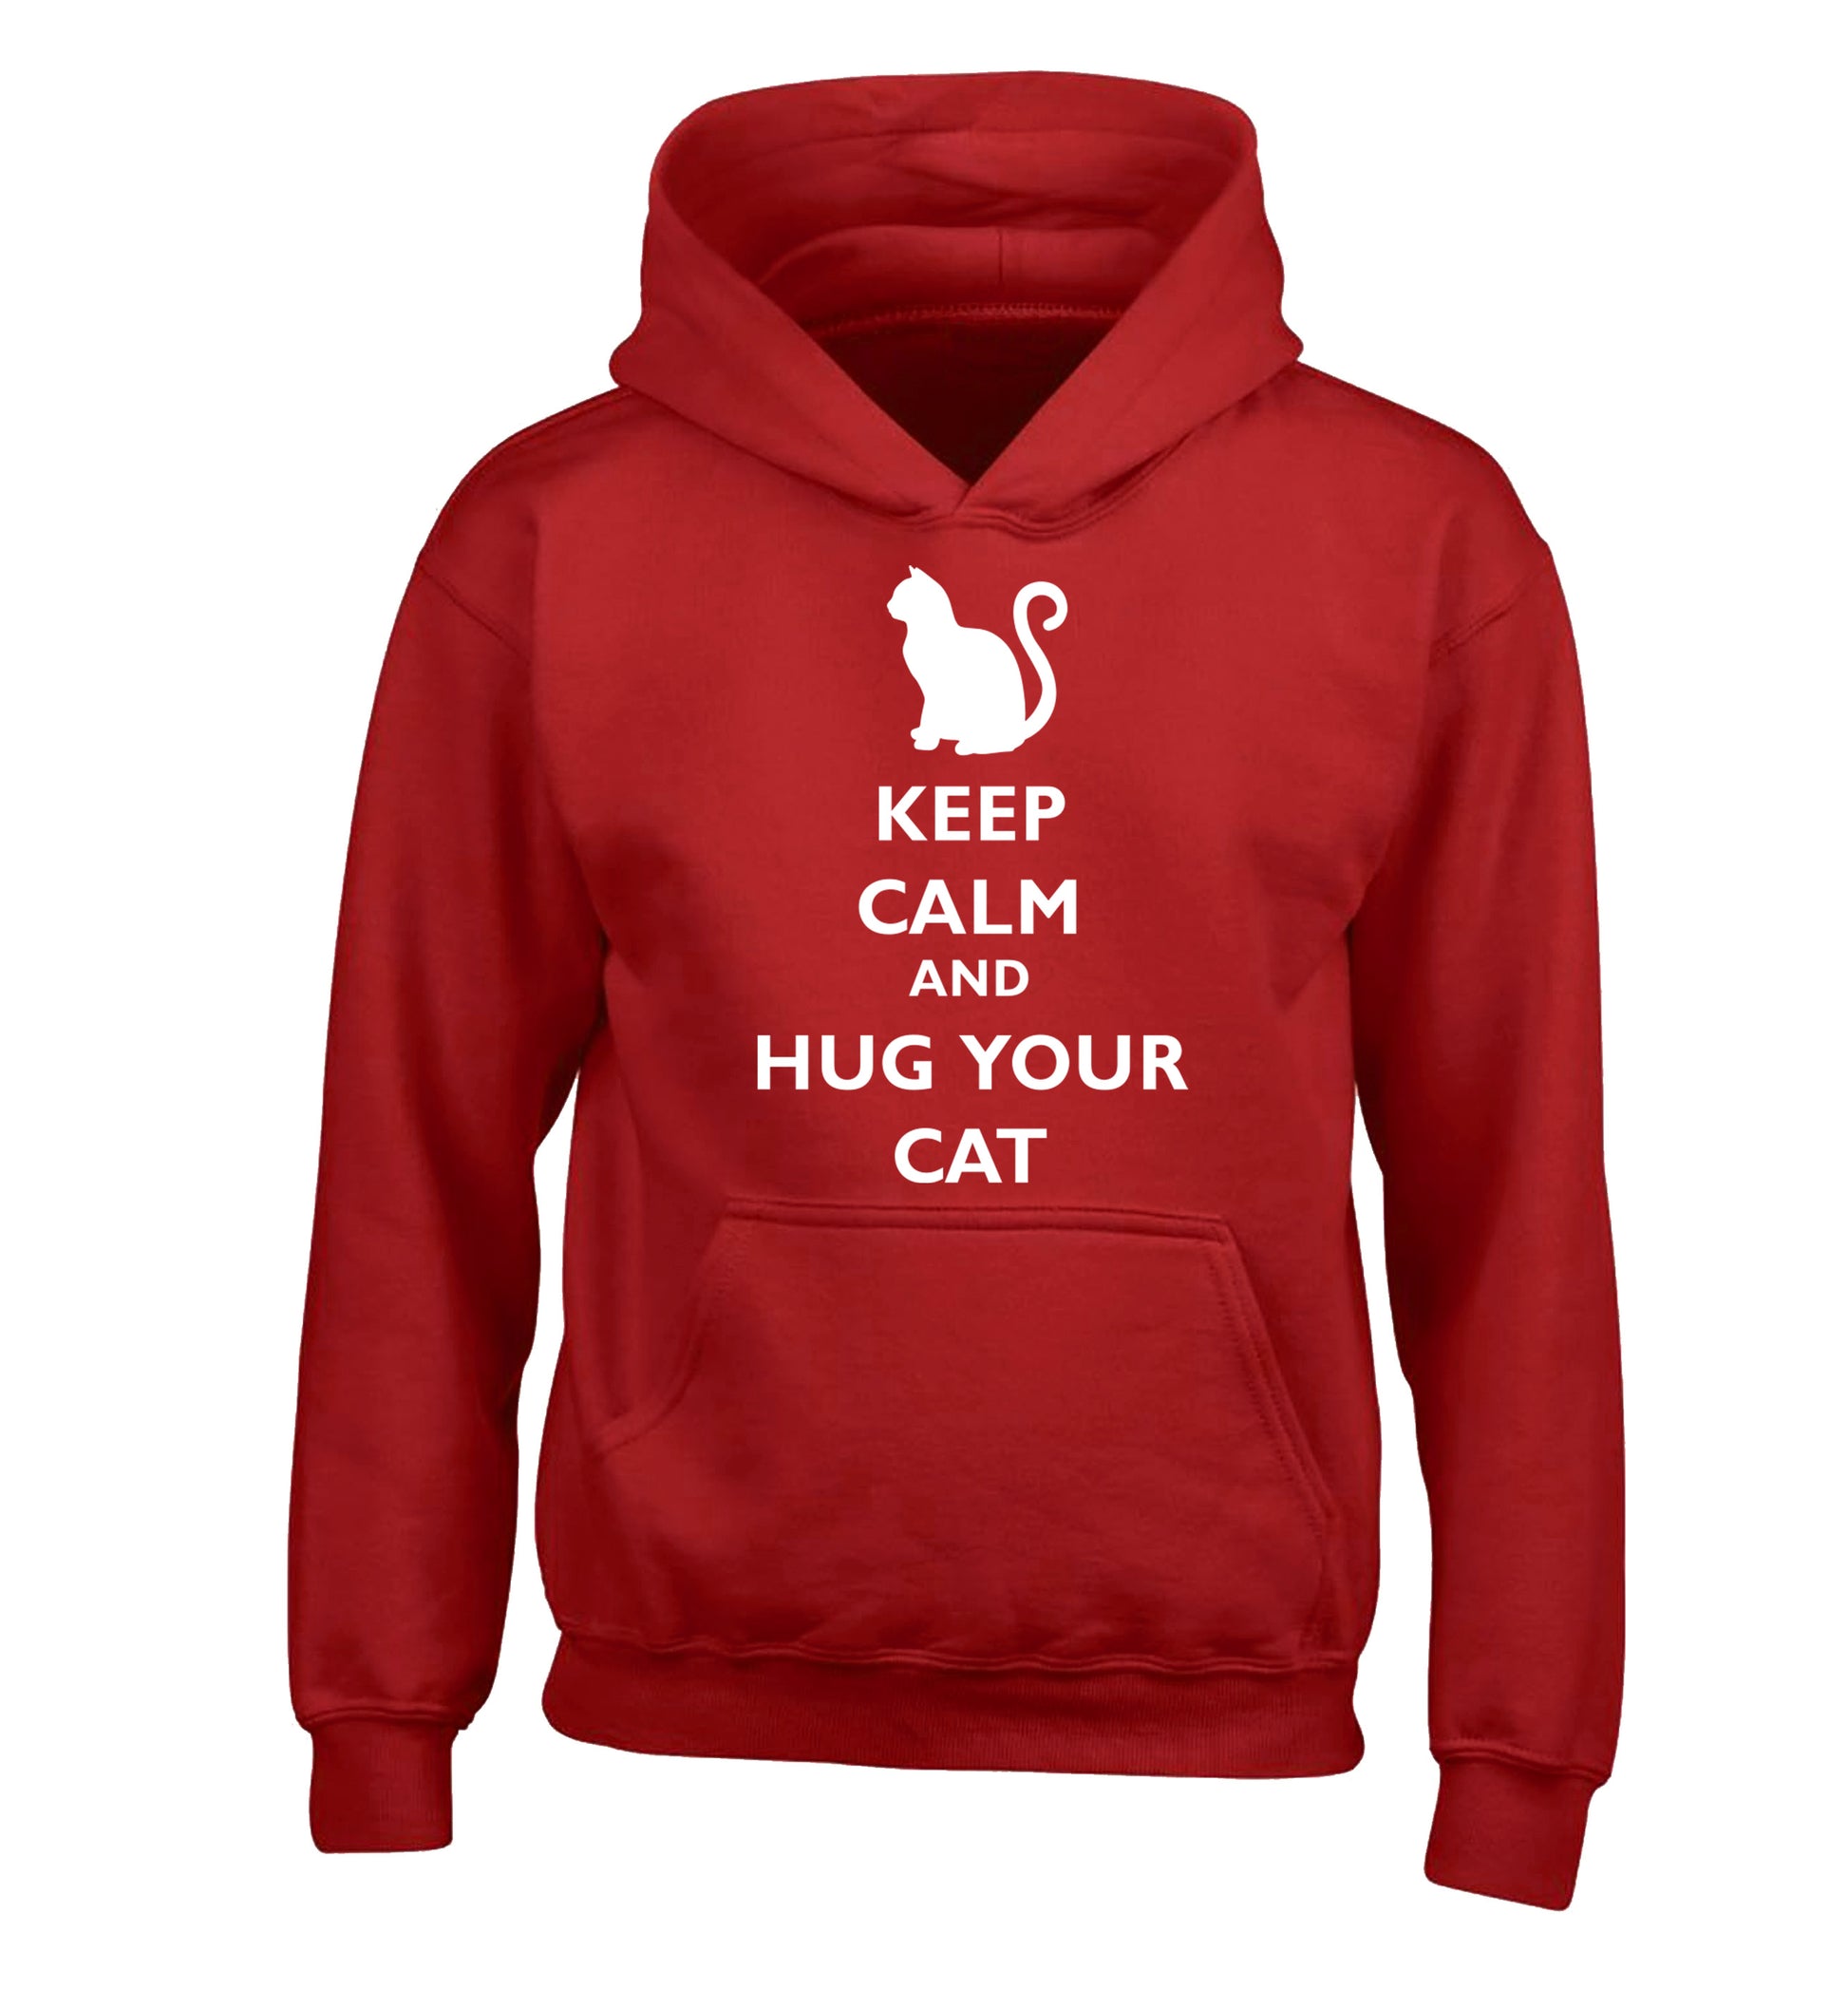 Keep calm and hug your cat children's red hoodie 12-13 Years